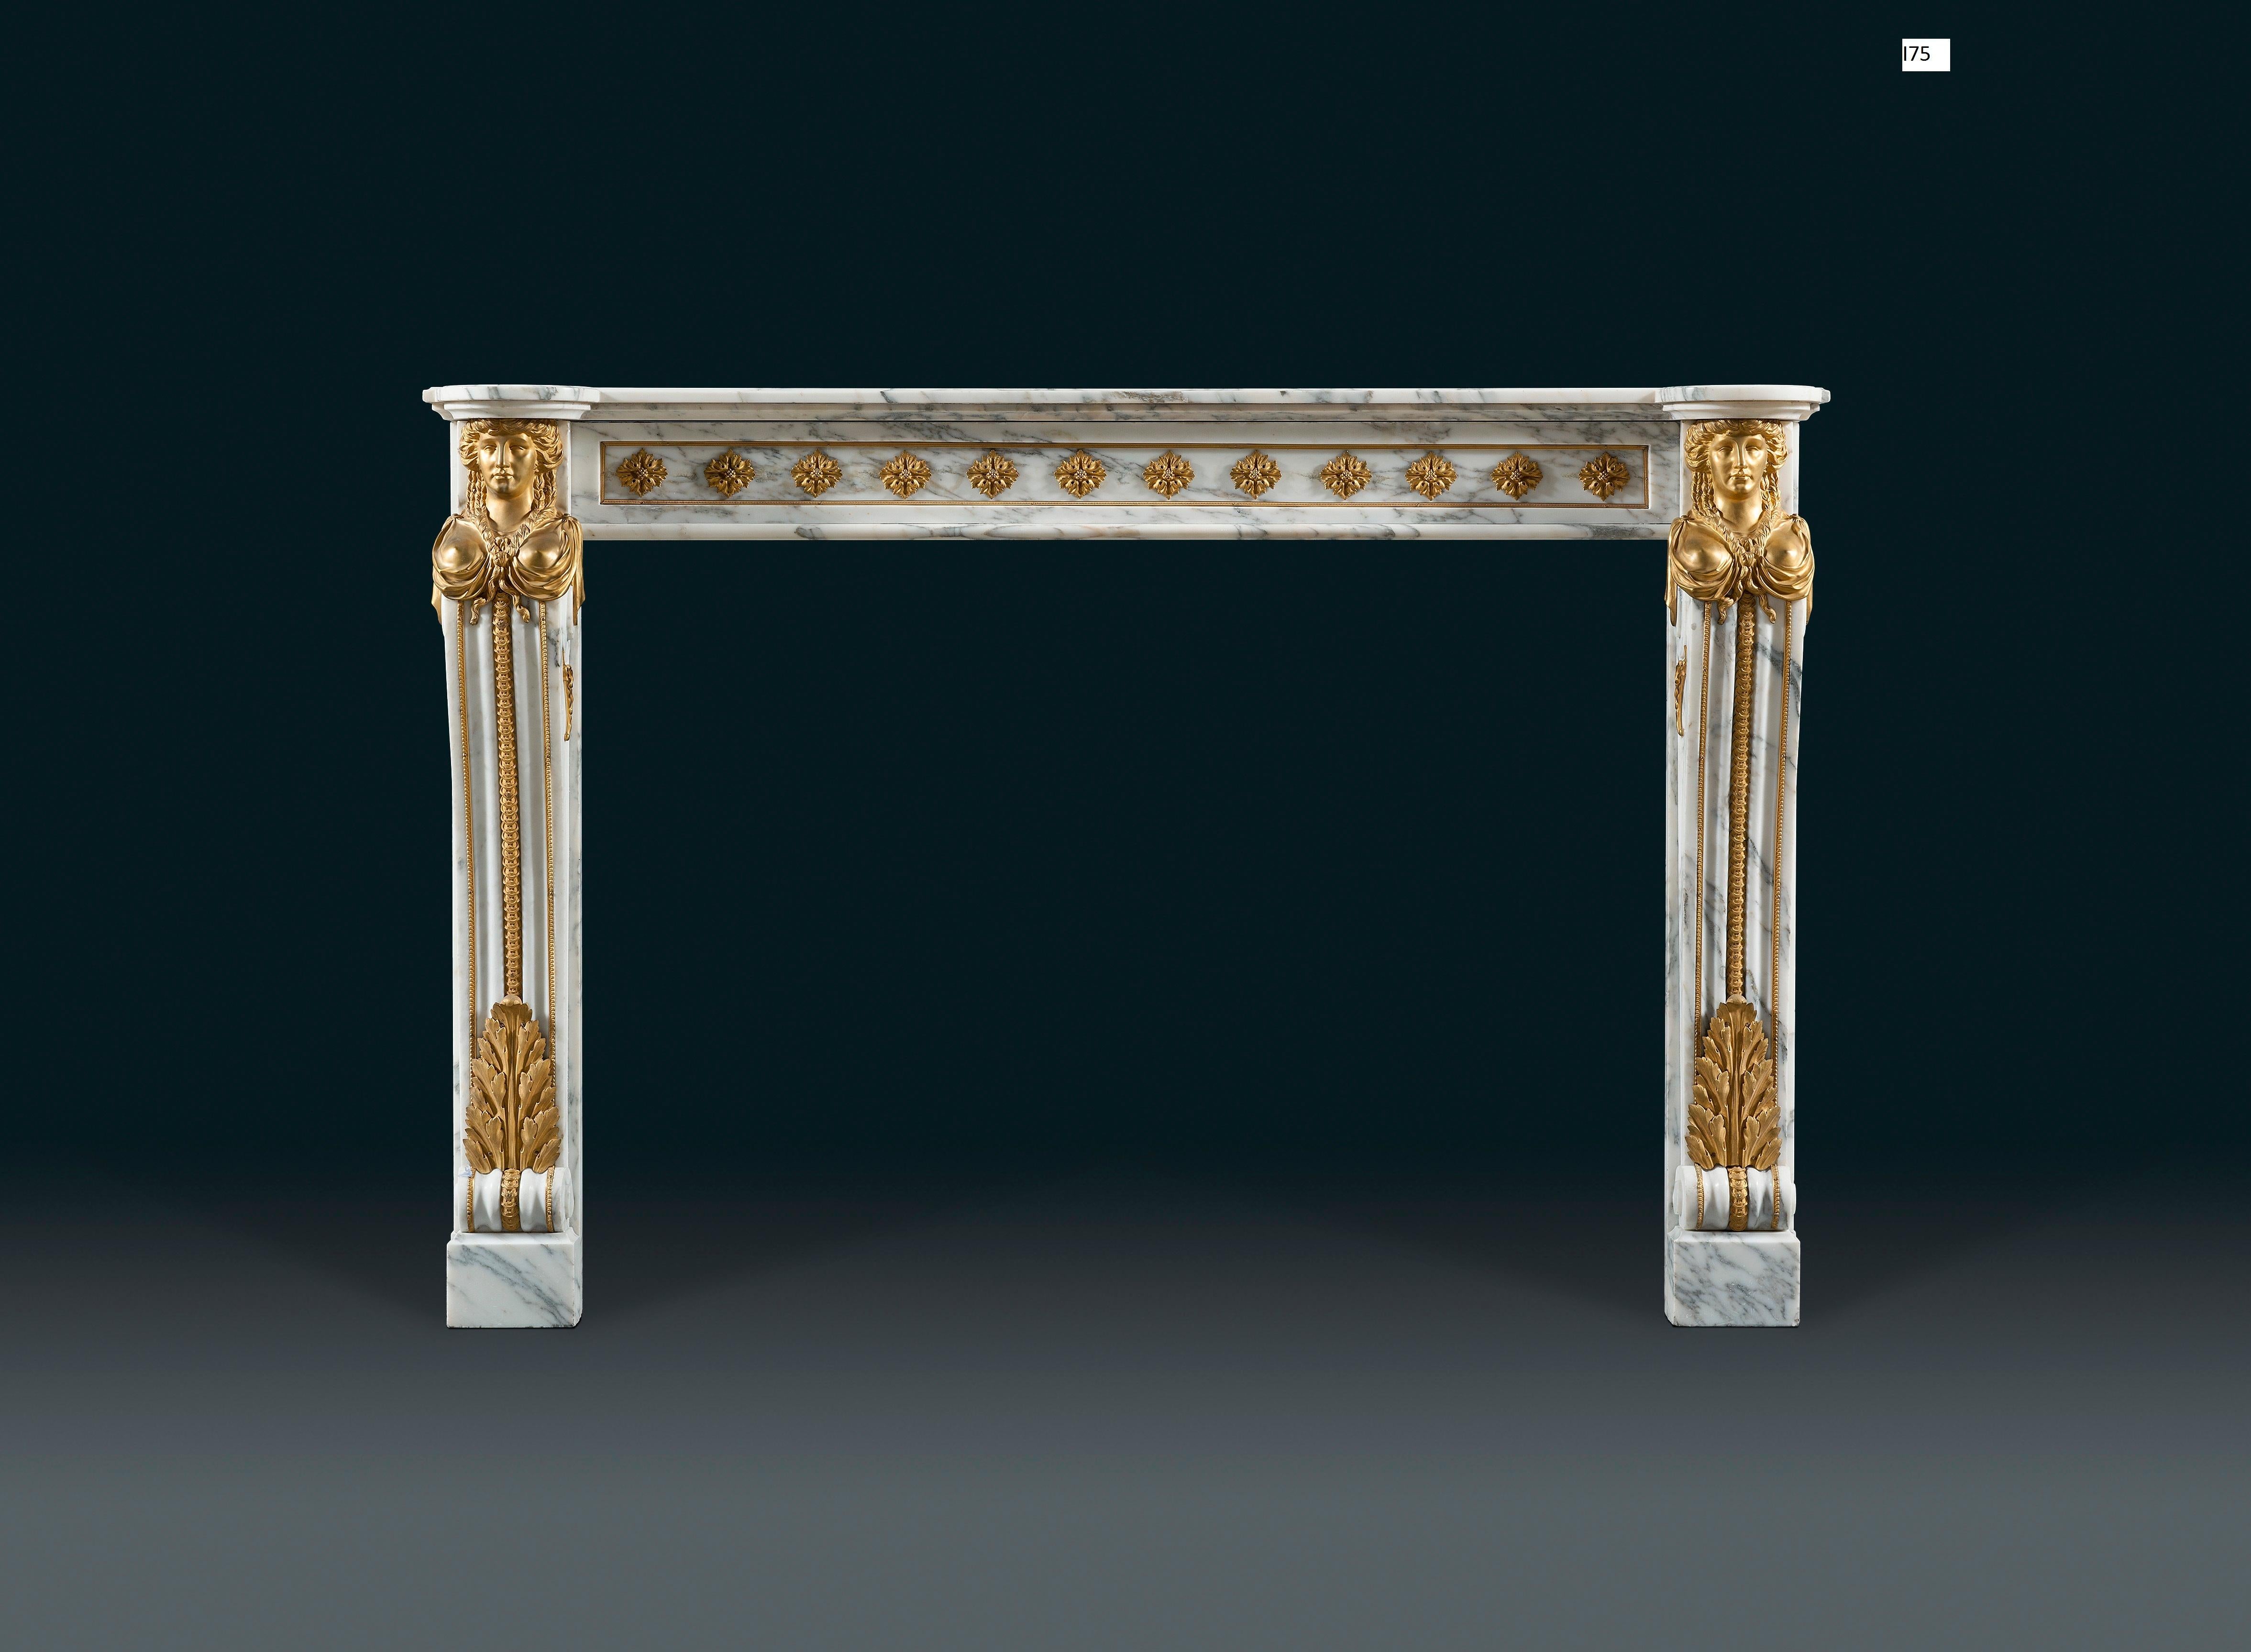 A 19th century, Louis XVI style chimneypiece in veined statuary marble with impressive and well-cast gilt bronze mounts. The rectangular shelf with rounded ends. The frieze with well-cast ormolu flower heads applied to the marble frame, the console